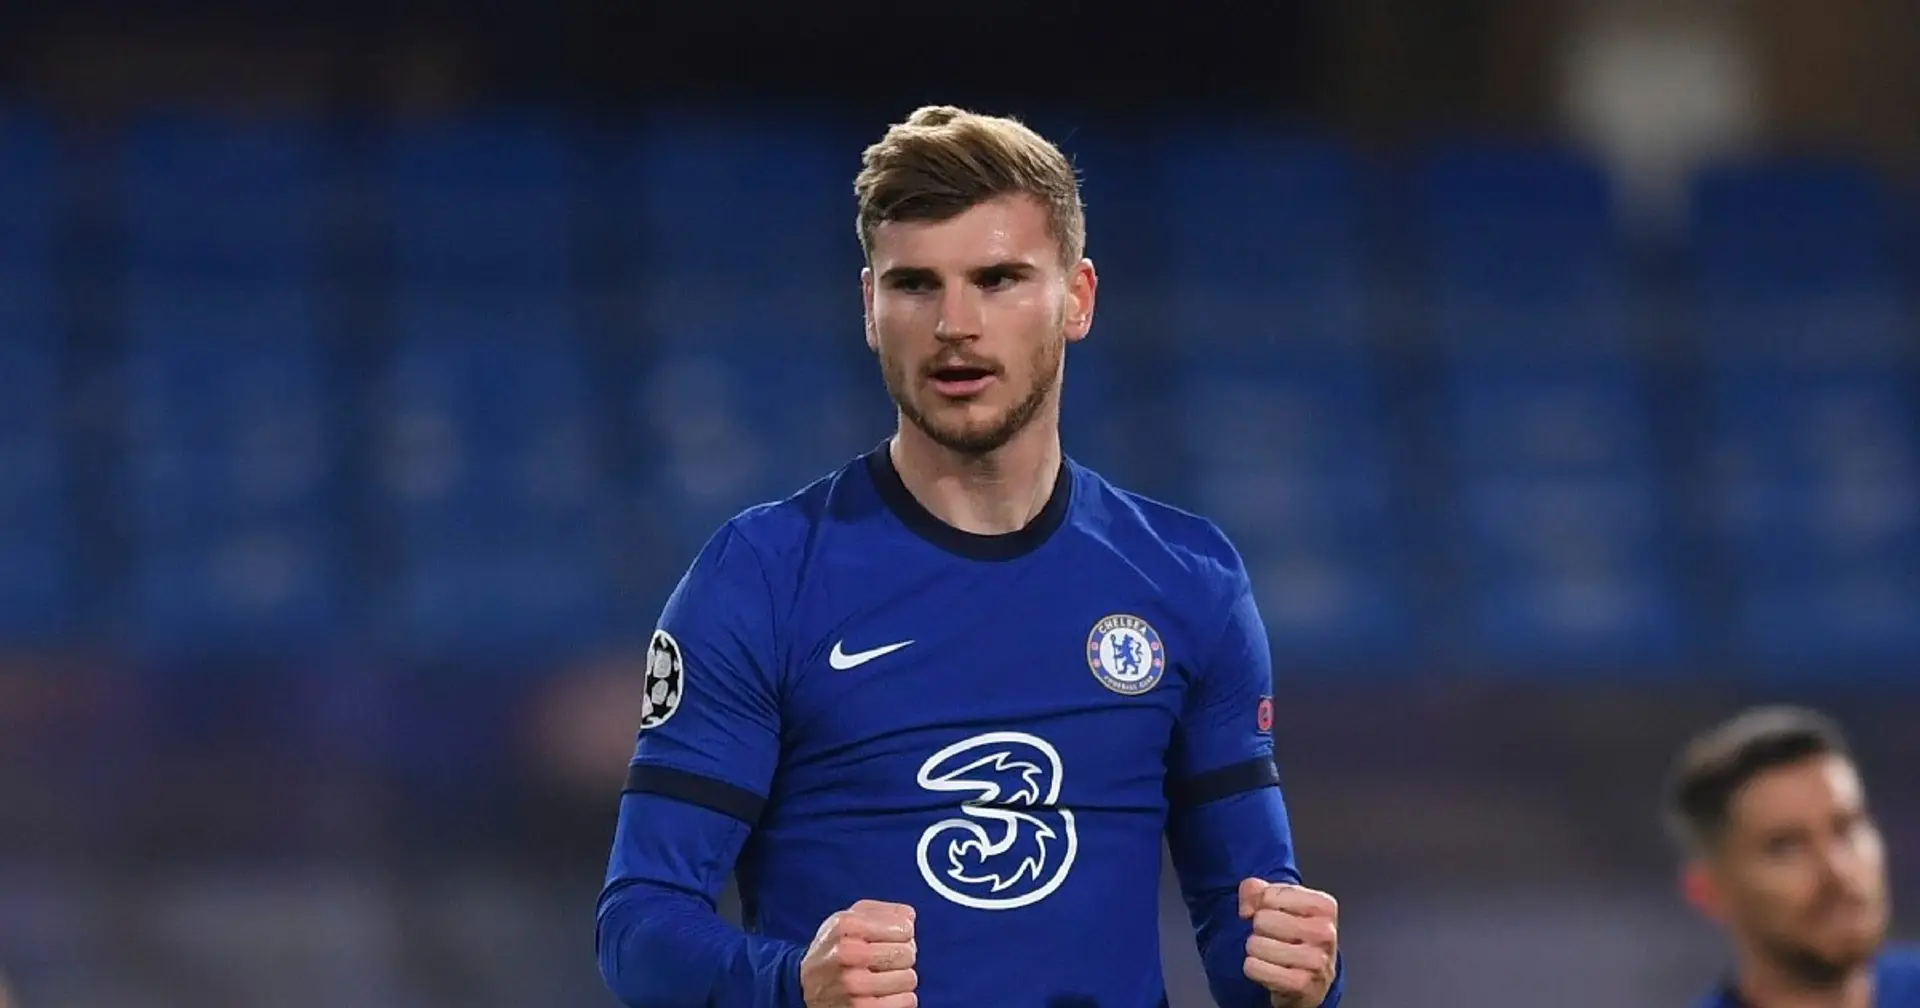 Werner one of Europe's elite goalscorers, stat shows